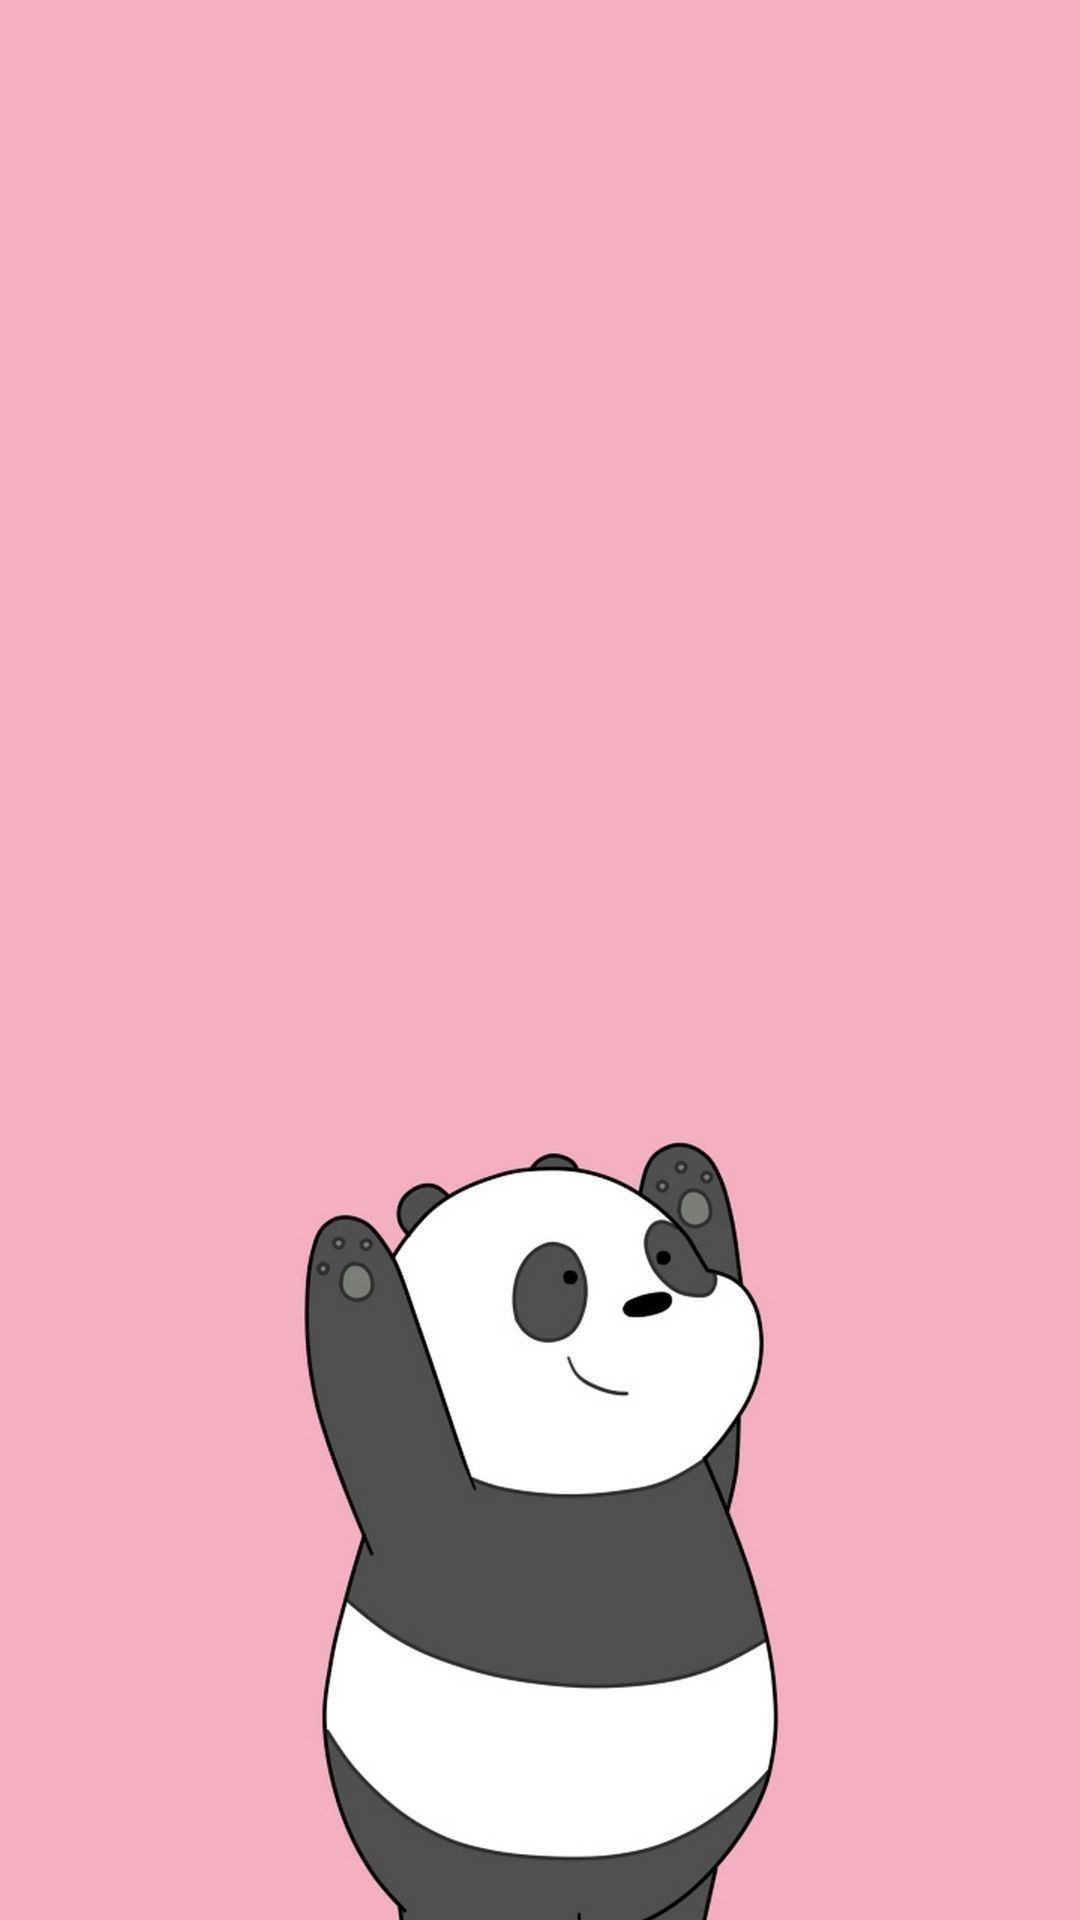 1080x1920  Cute Panda Wallpaper For Android | Best HD Wallpapers